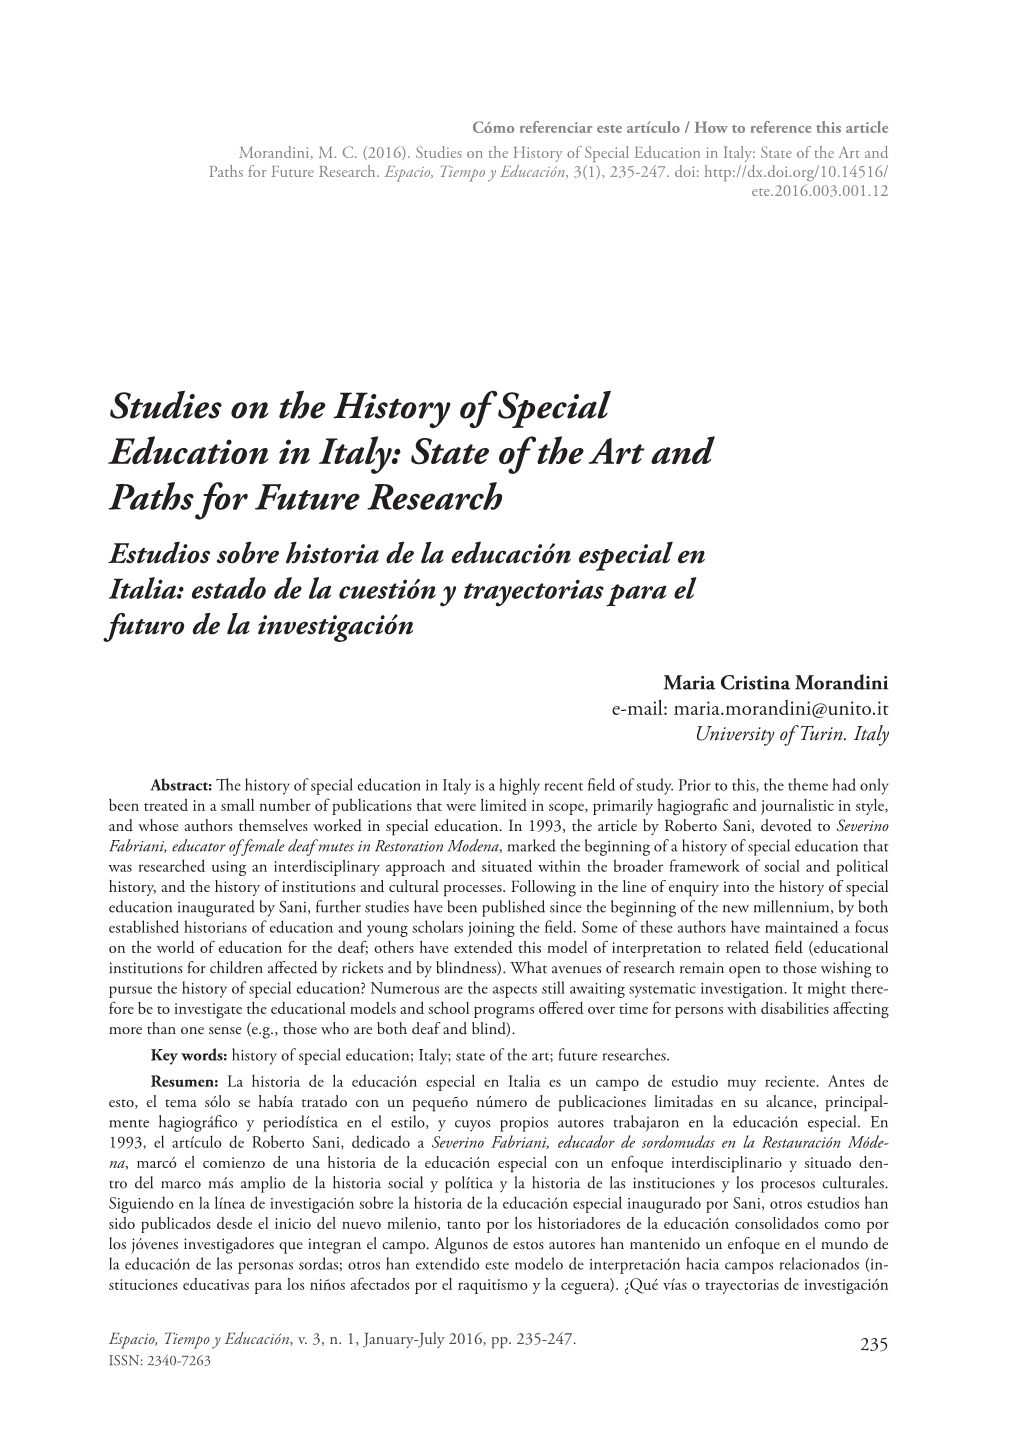 Studies on the History of Special Education in Italy: State of the Art and Paths for Future Research